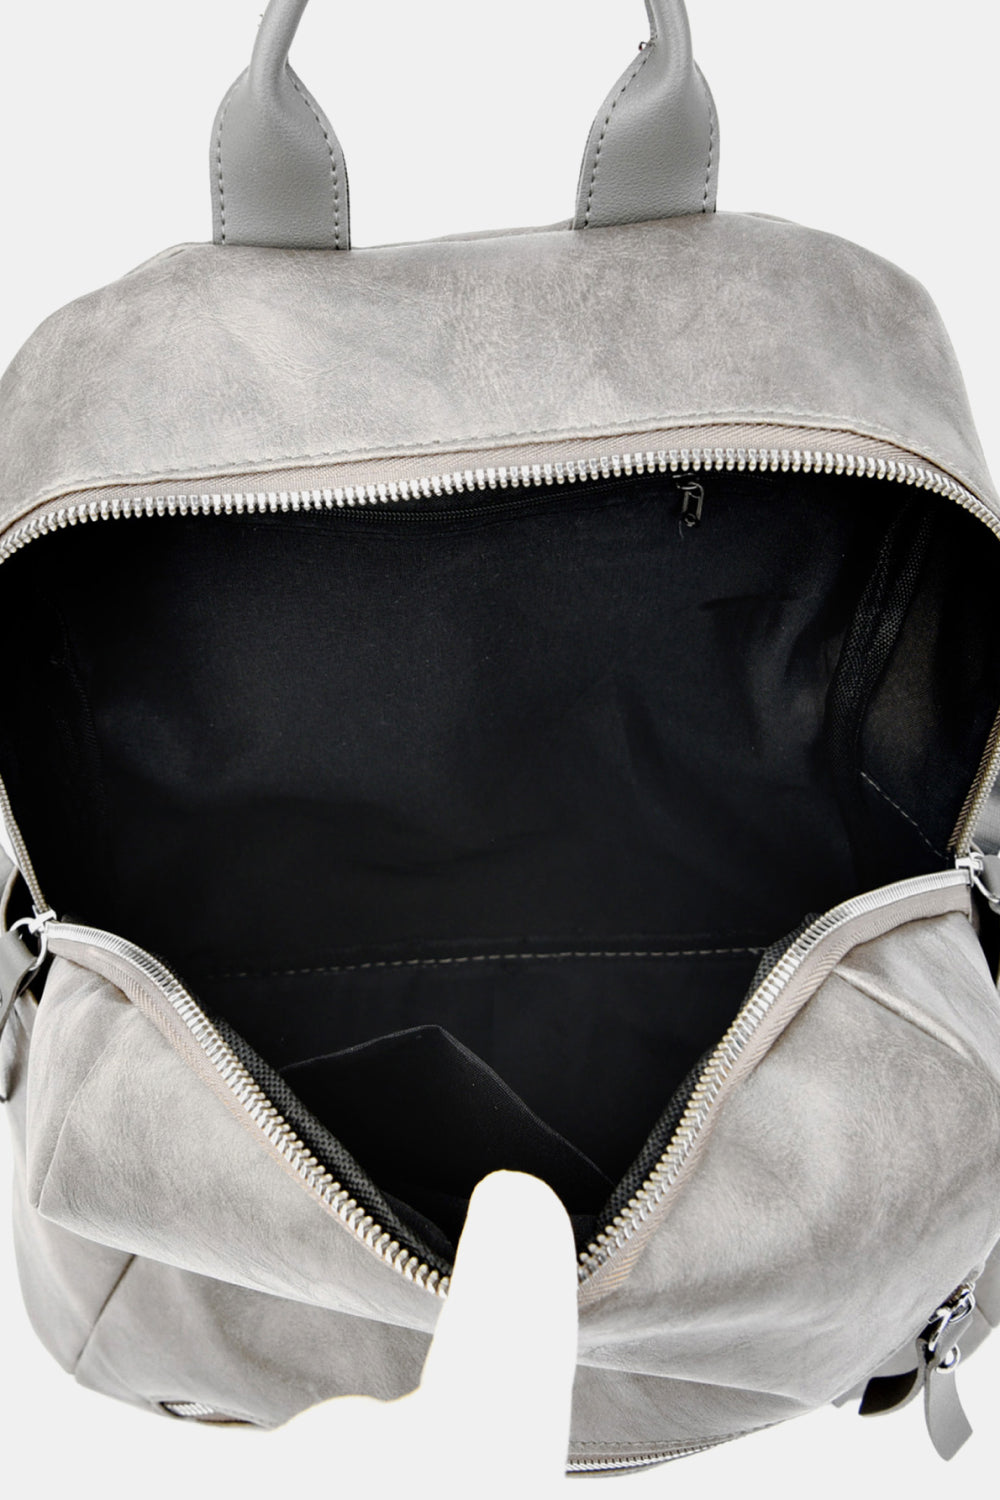 PU Leather Convertible Backpack - Cheeky Chic Boutique